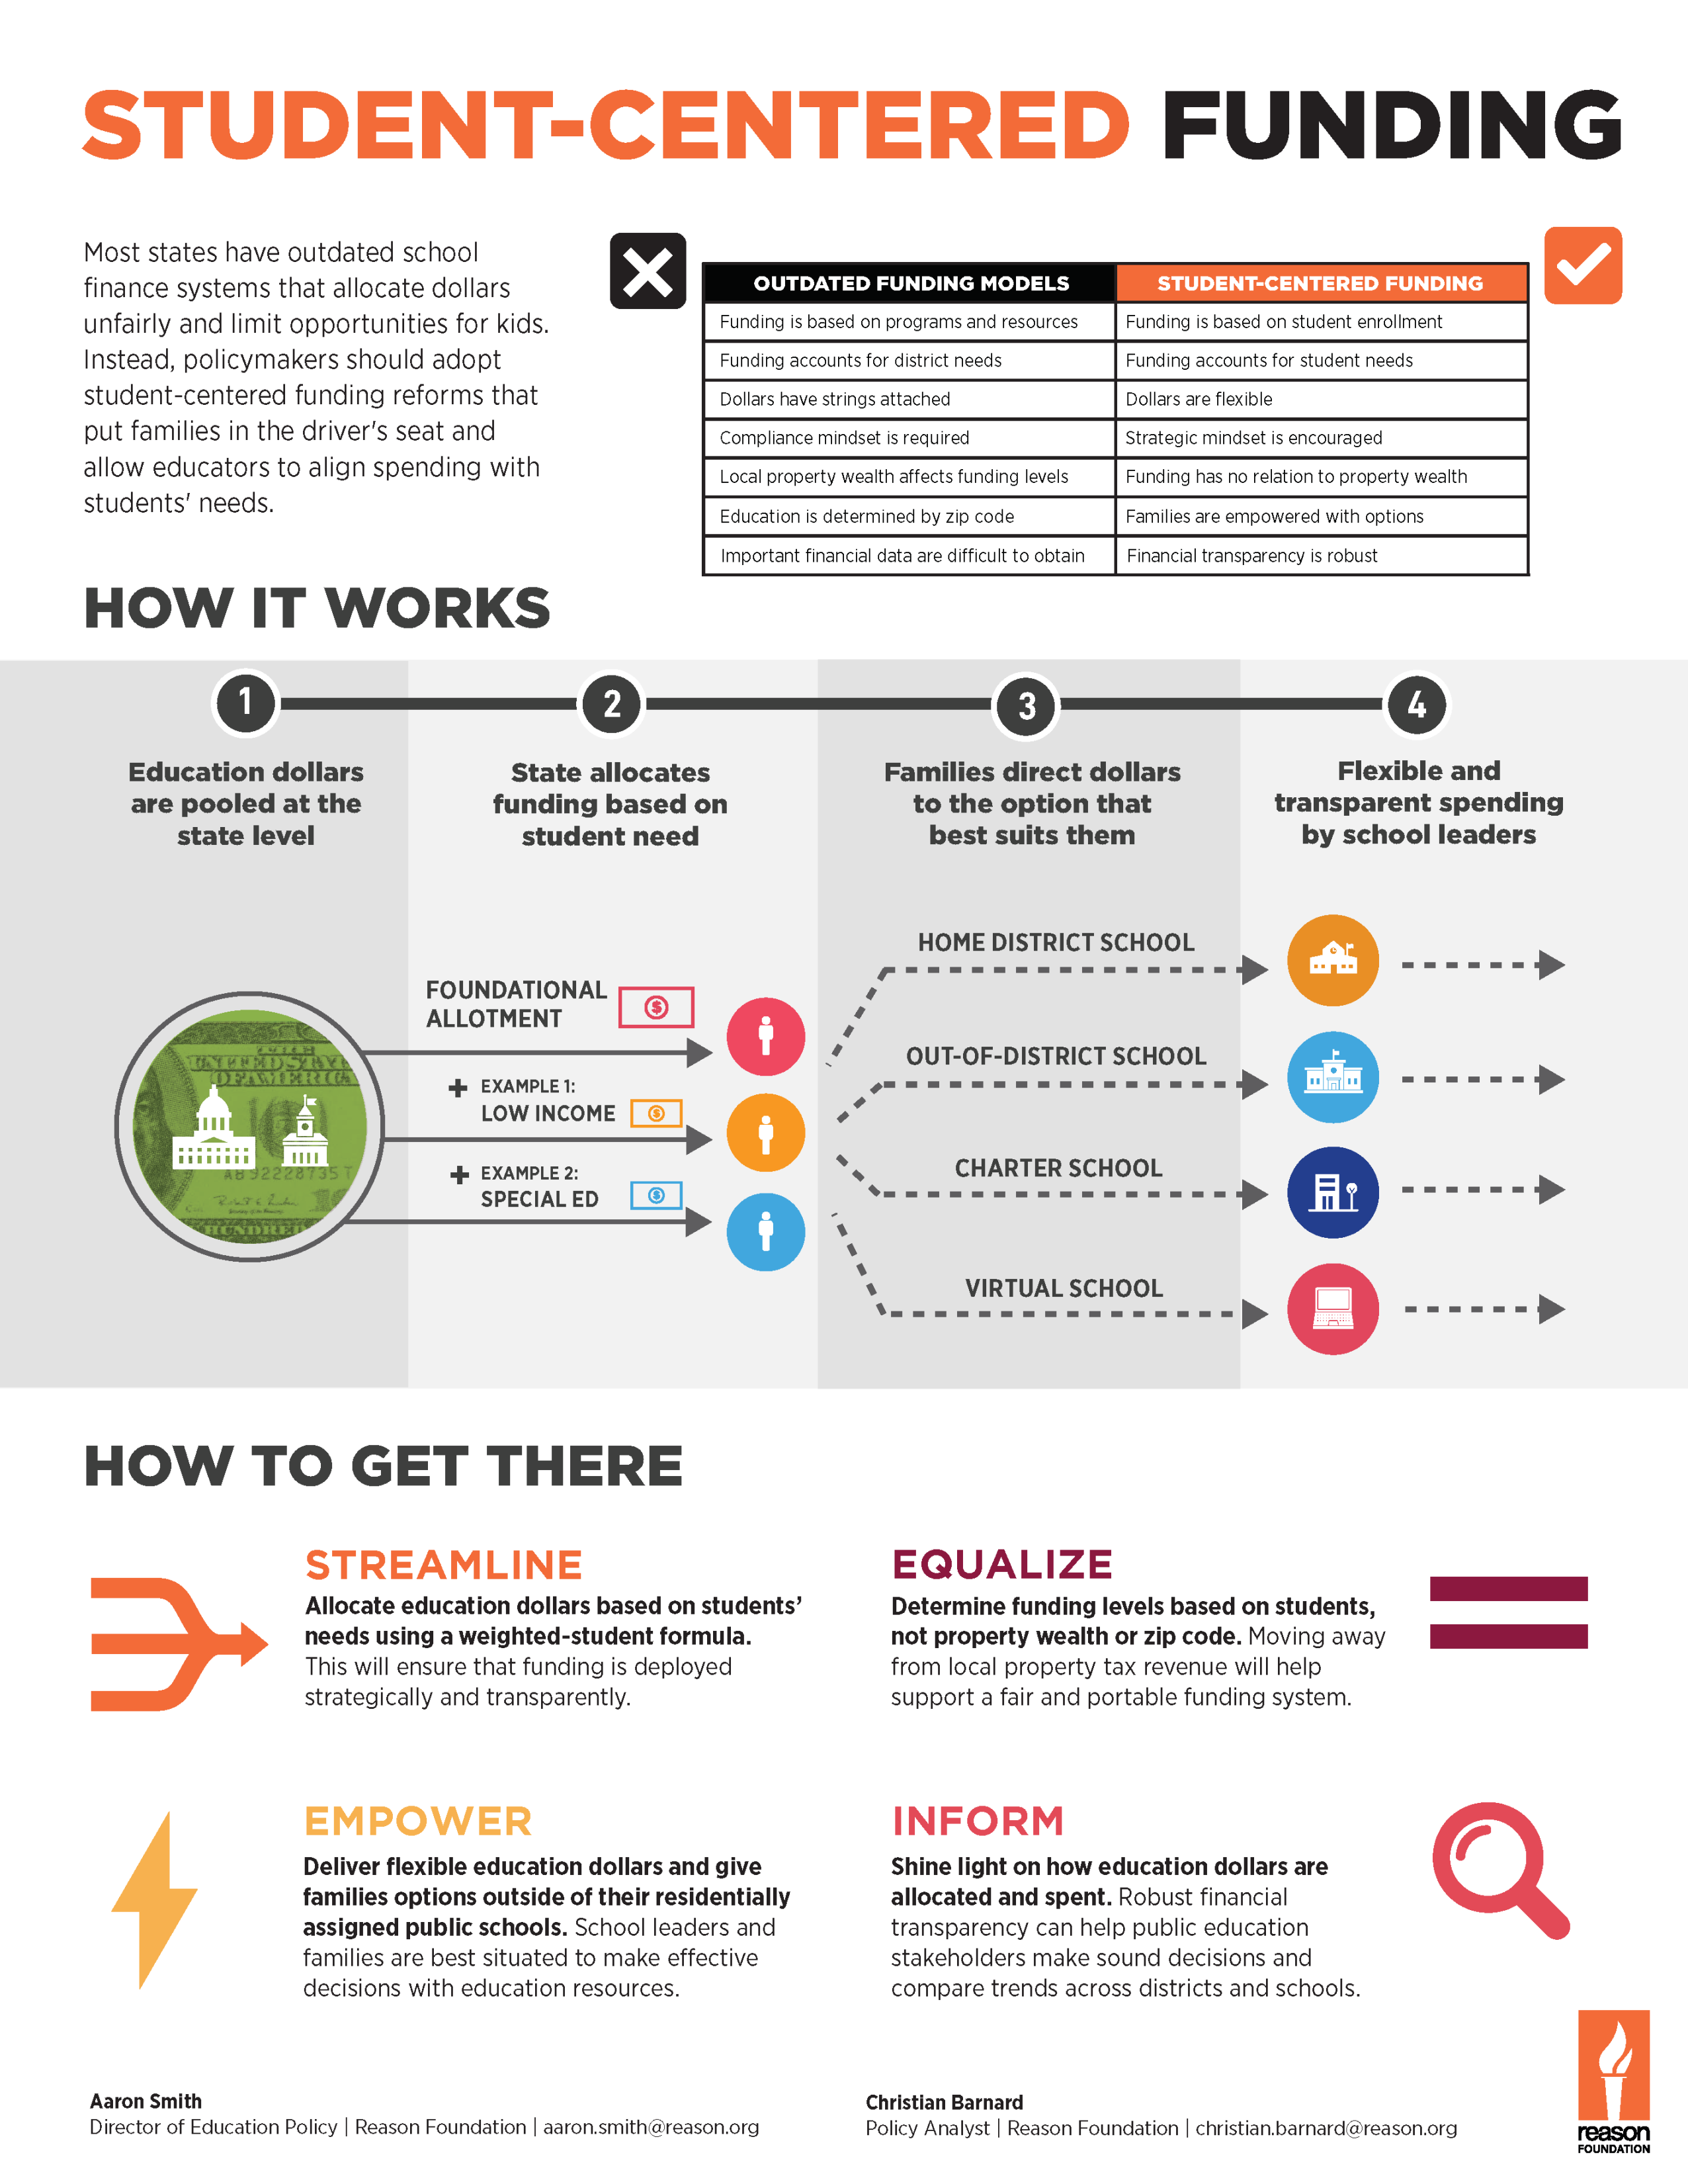 Infographic: How Student-Centered Funding Works and How to Get